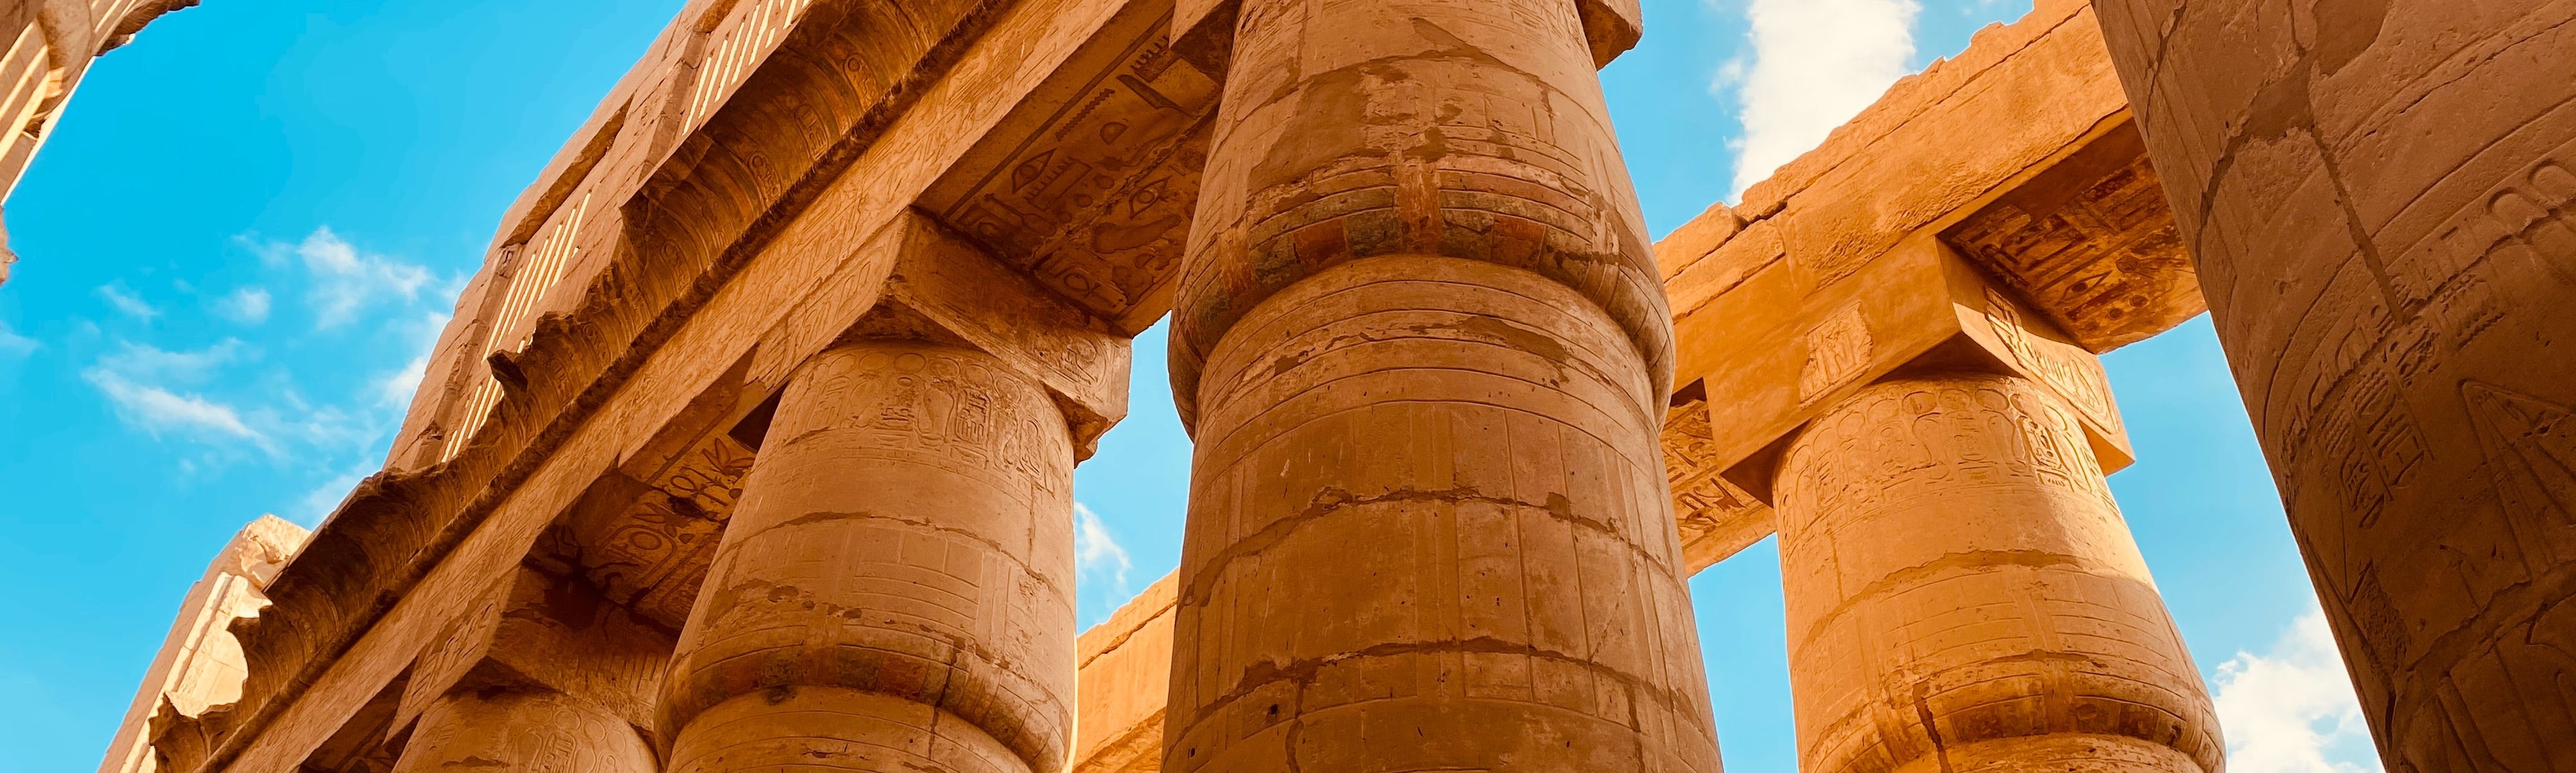 looking up at columns at karnak temple in luxor egypt